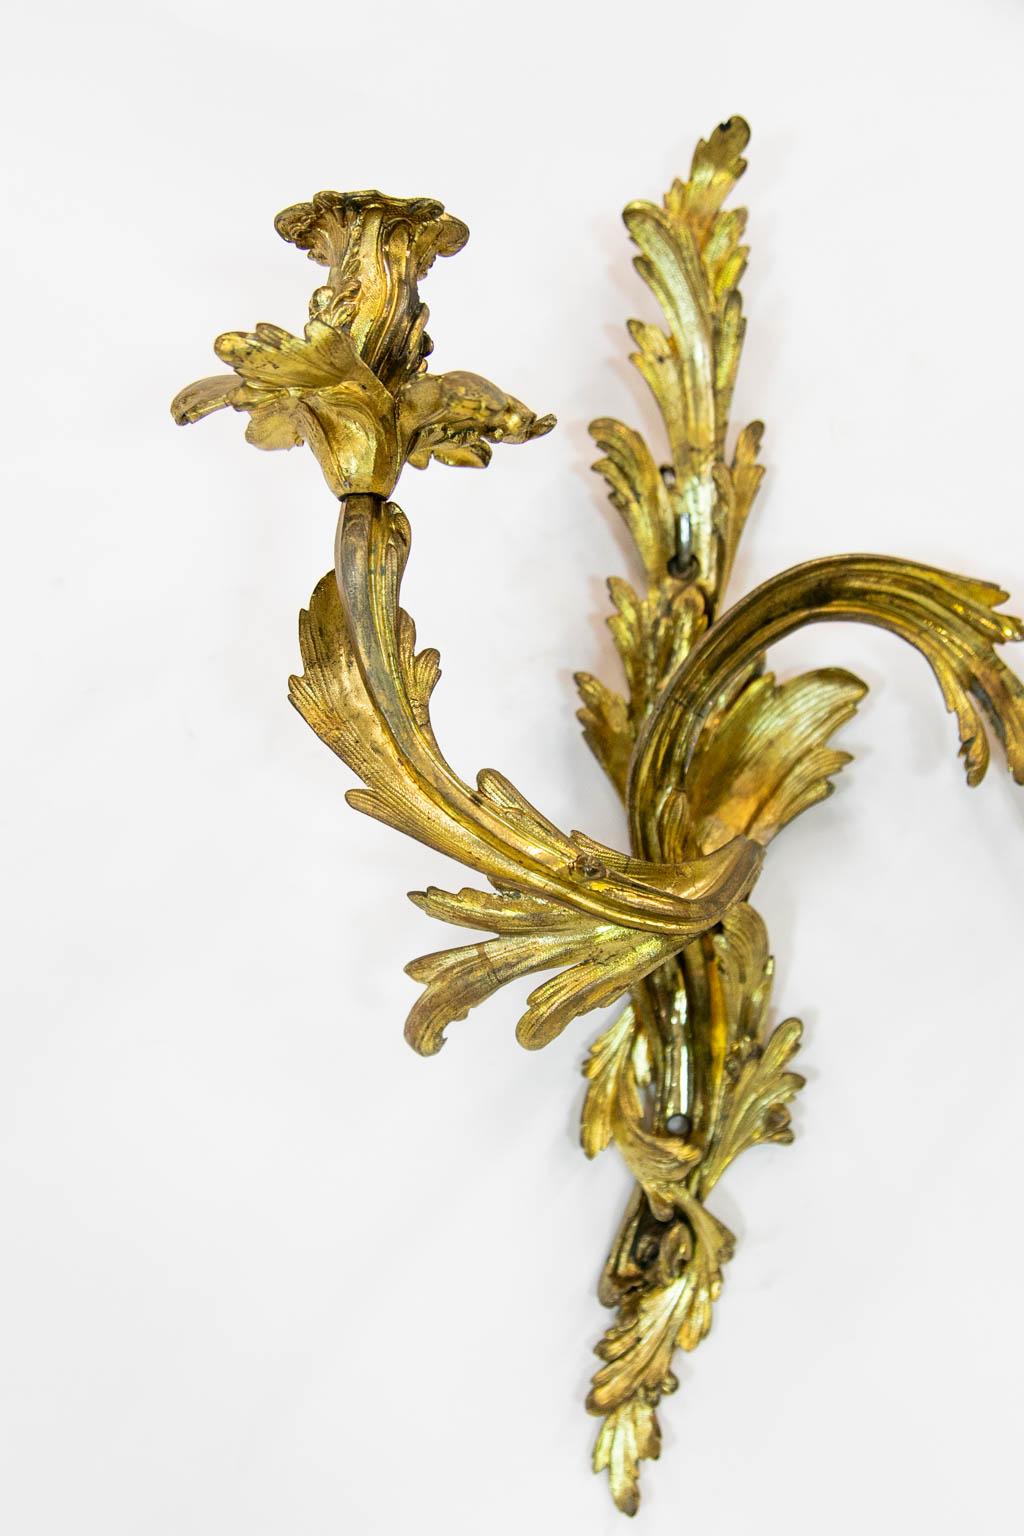 This wall sconce is made in the classic Rococo style. It has stylized leaf and foliate motifs.